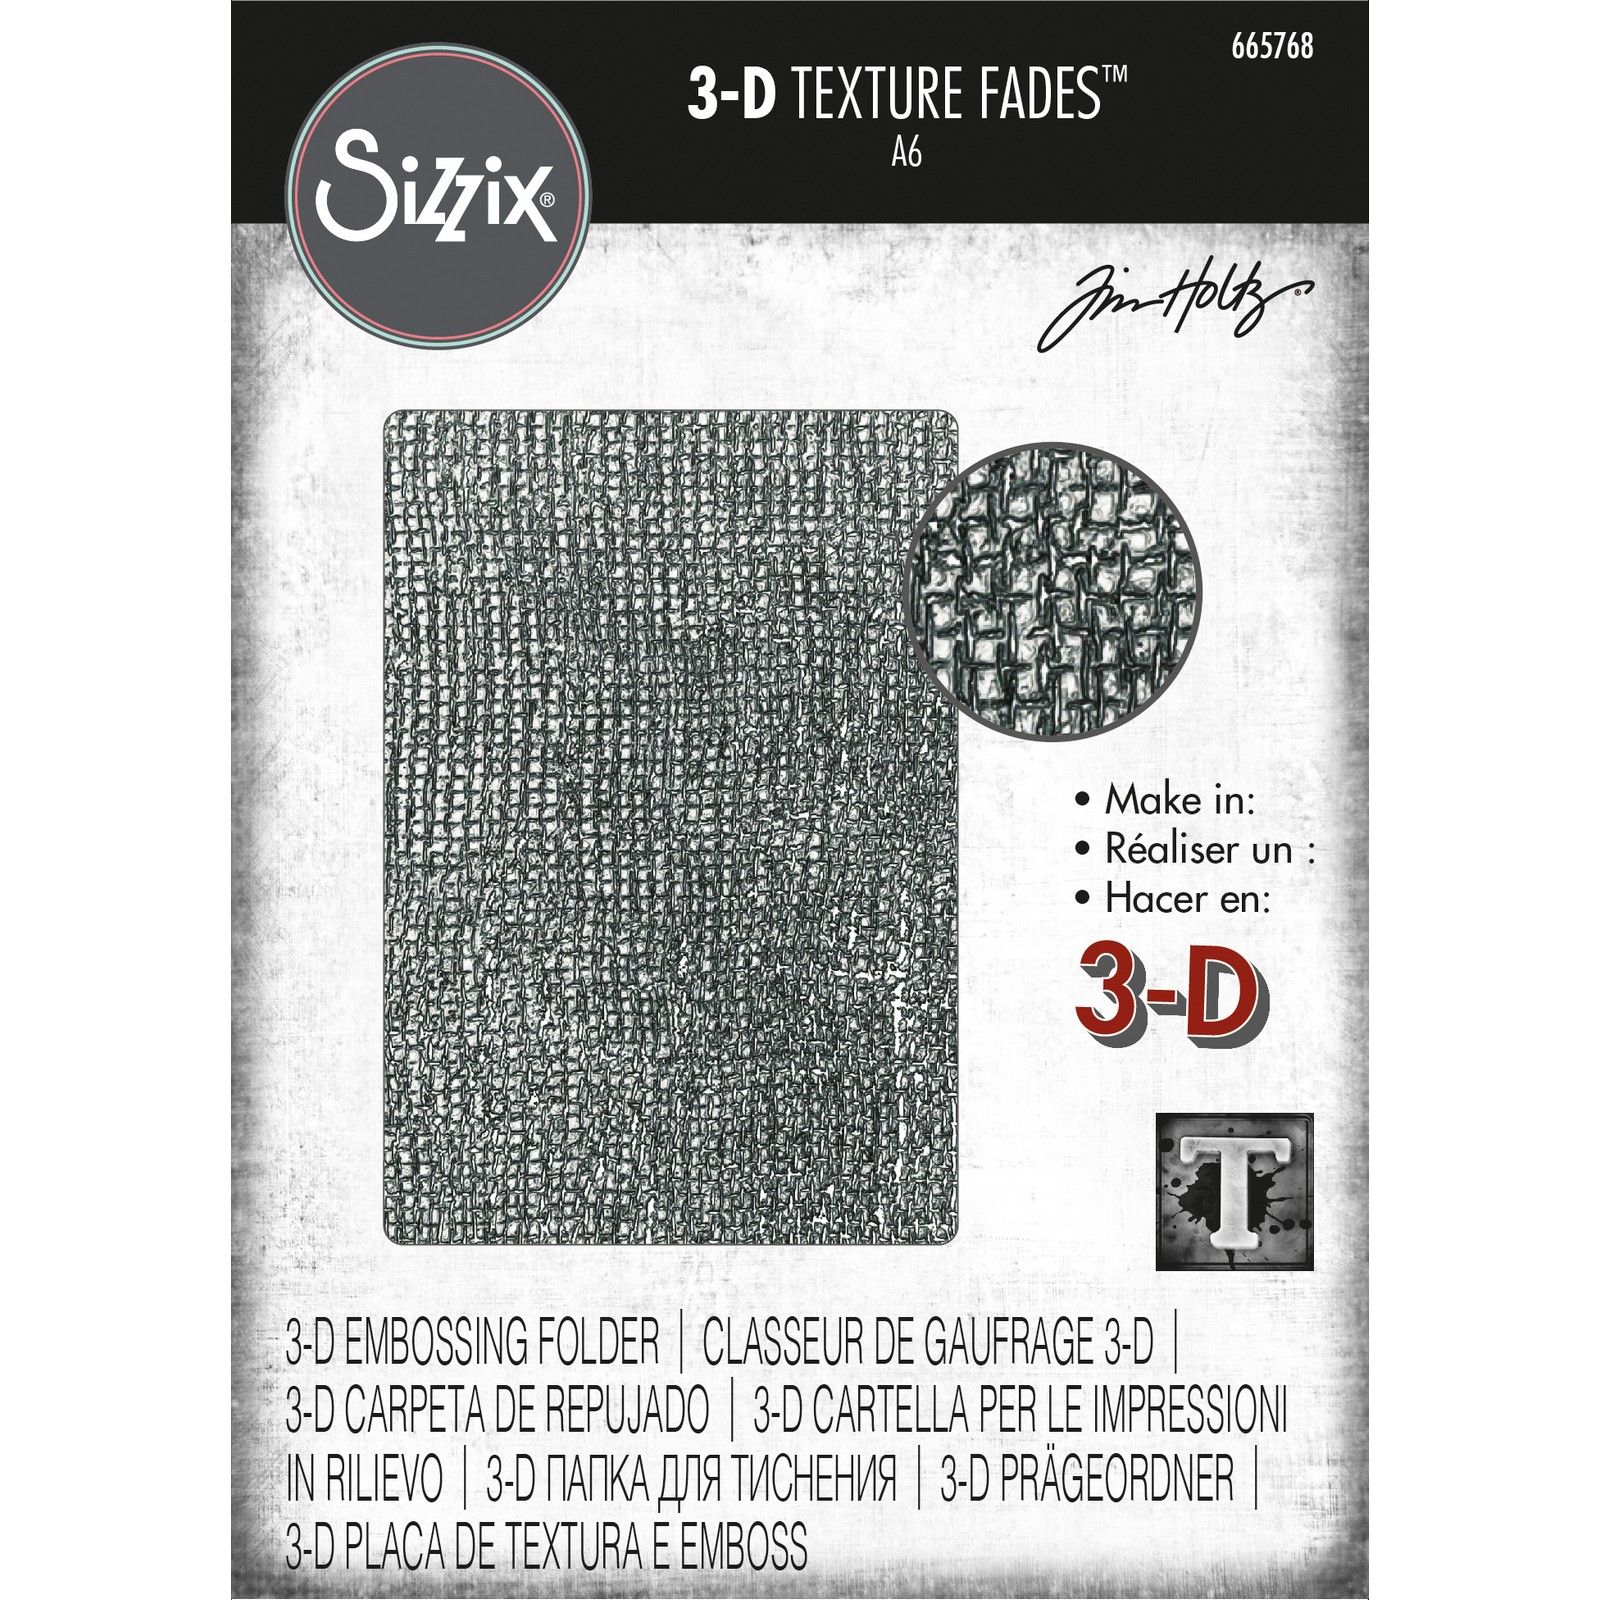 Sizzix Embossing Folder 3-D Texture Fades By Tim Holtz - Woven